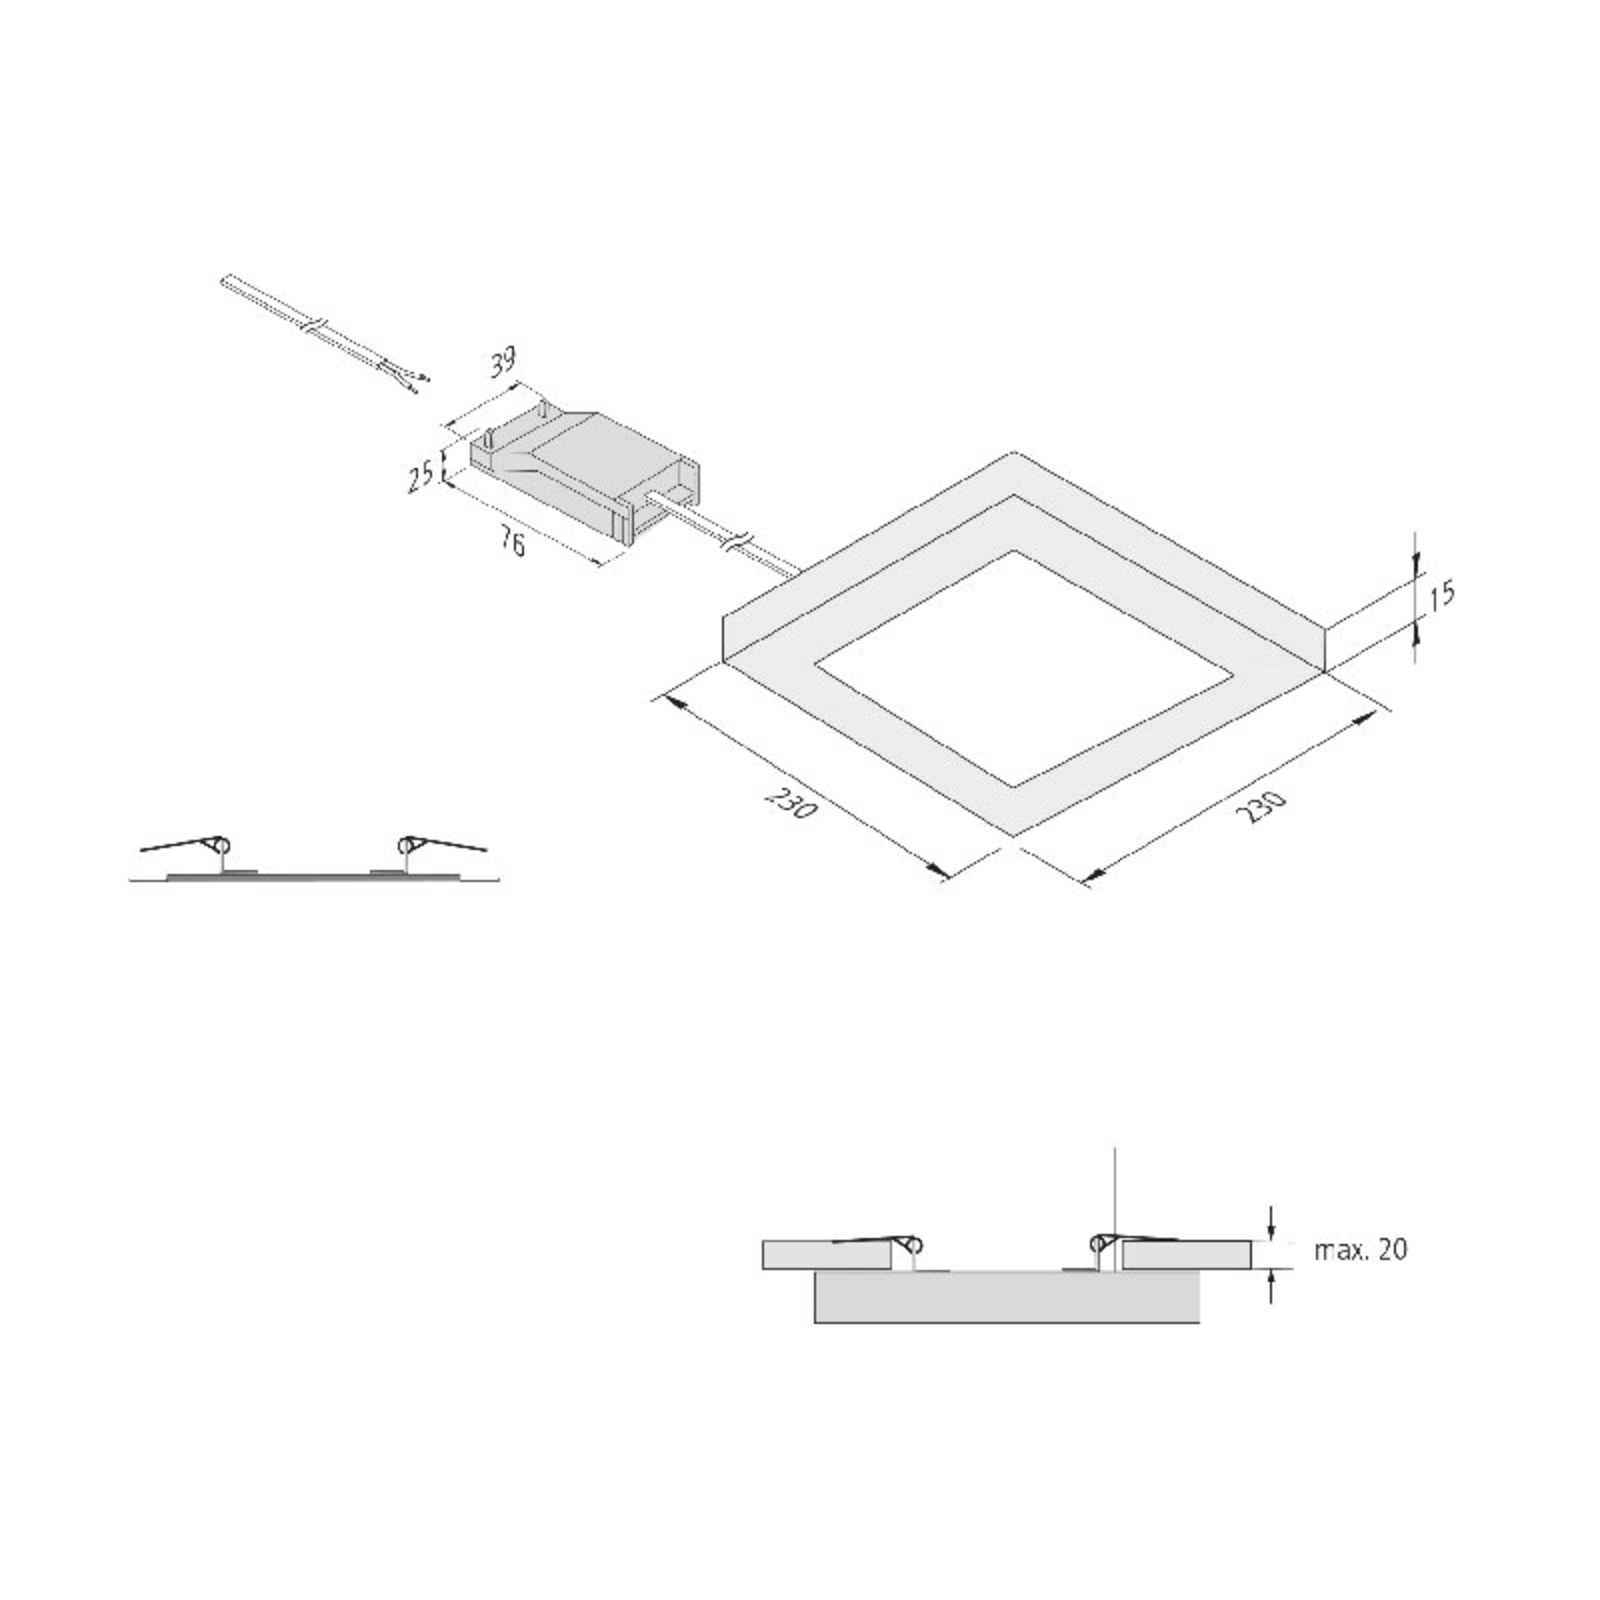 FQ 65/205 LED light, surface/recessed, 4,000 K